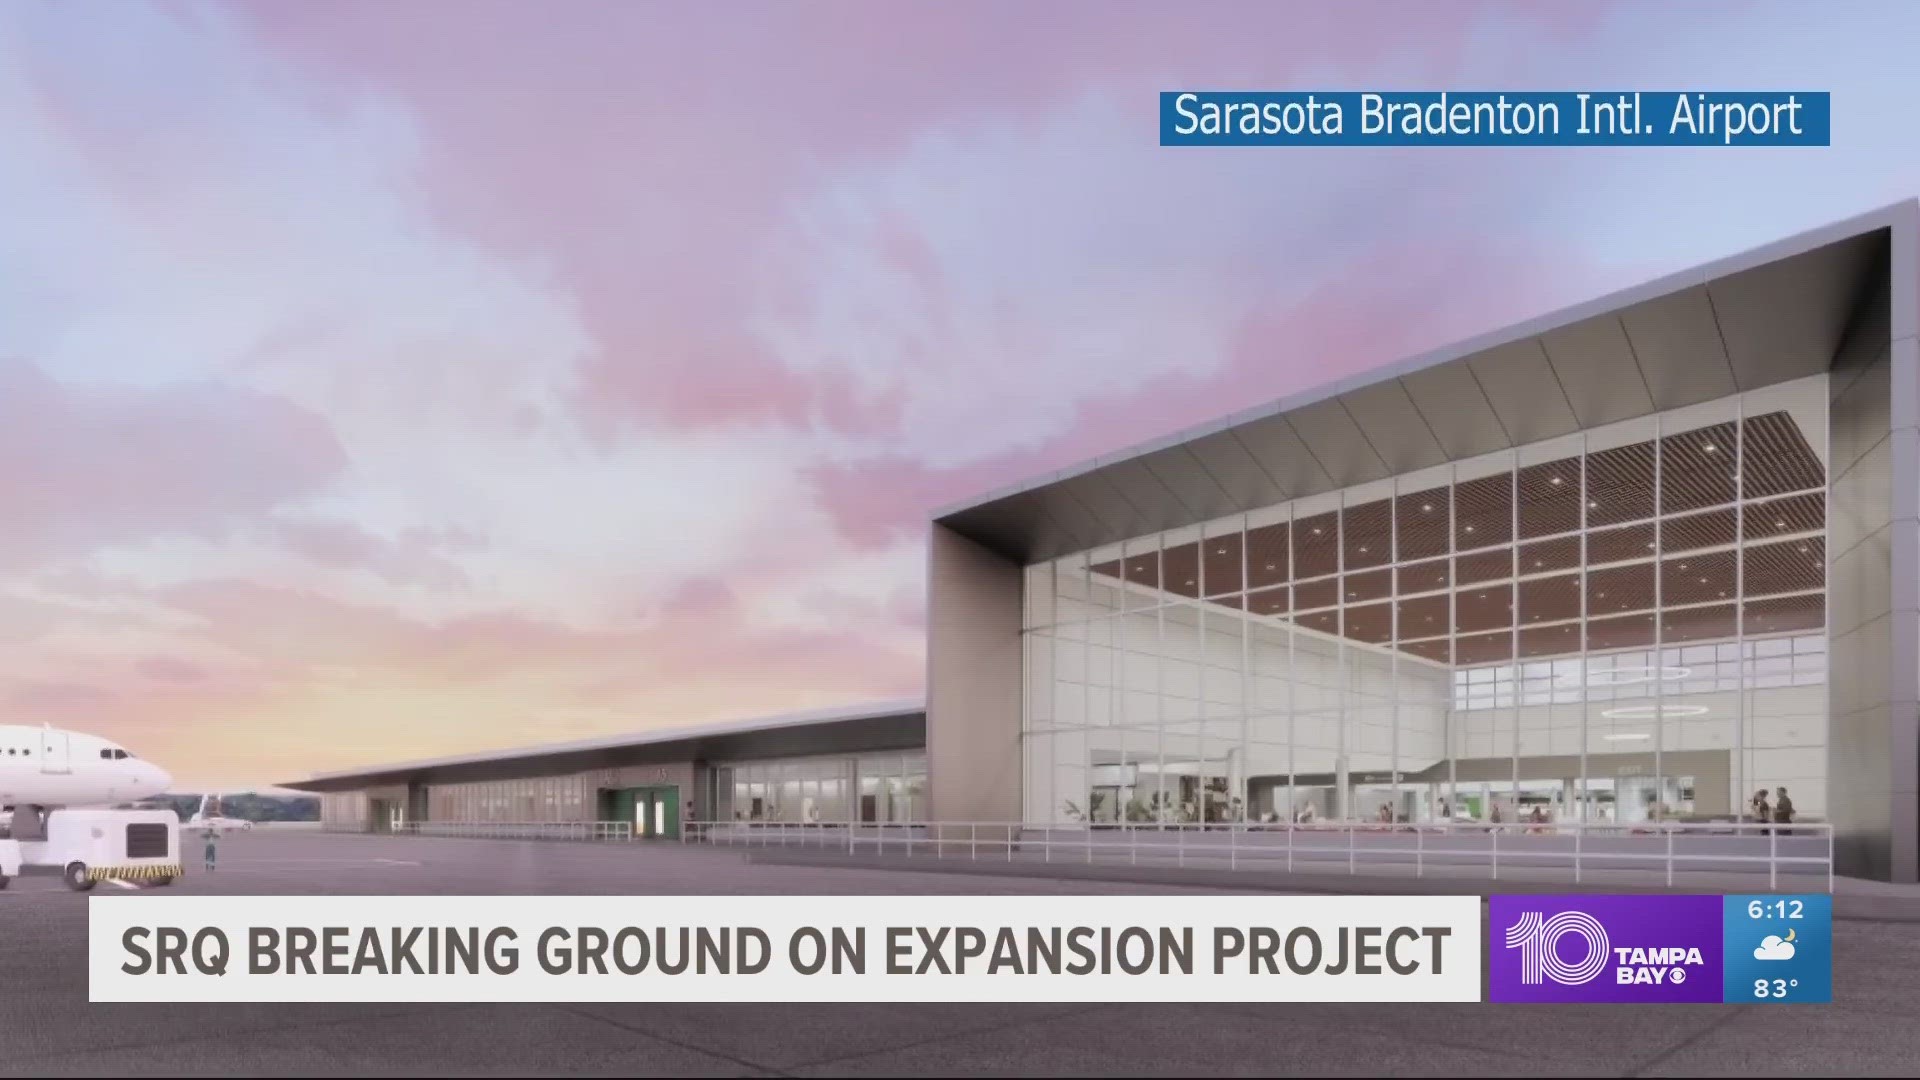 The new gates will include new ramps, security checkpoints and food and beverage retail.